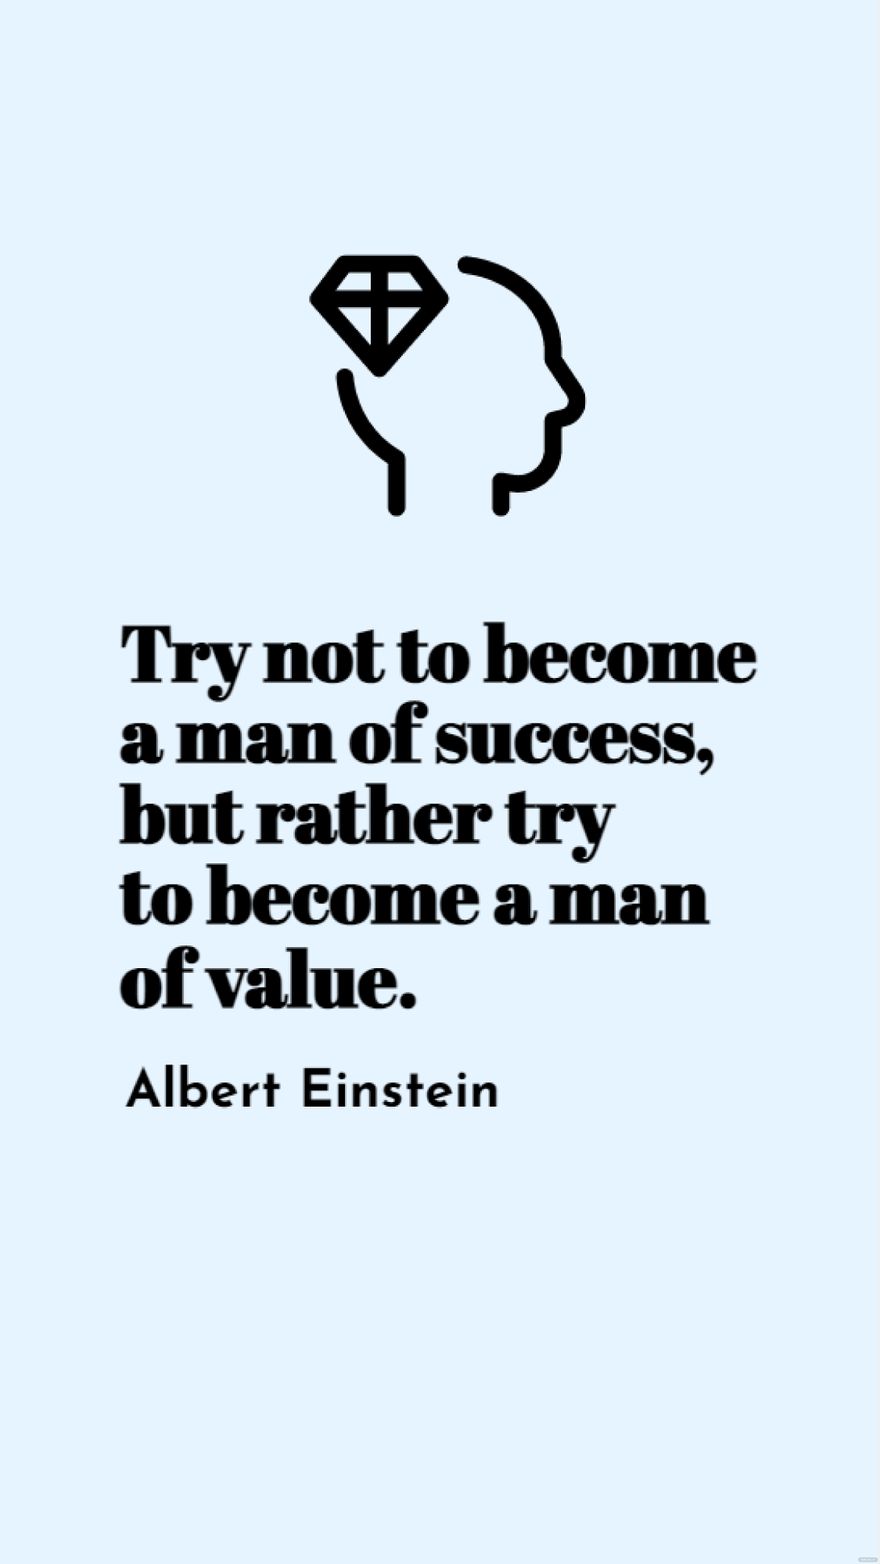 Albert Einstein - Try not to become a man of success, but rather try to become a man of value.